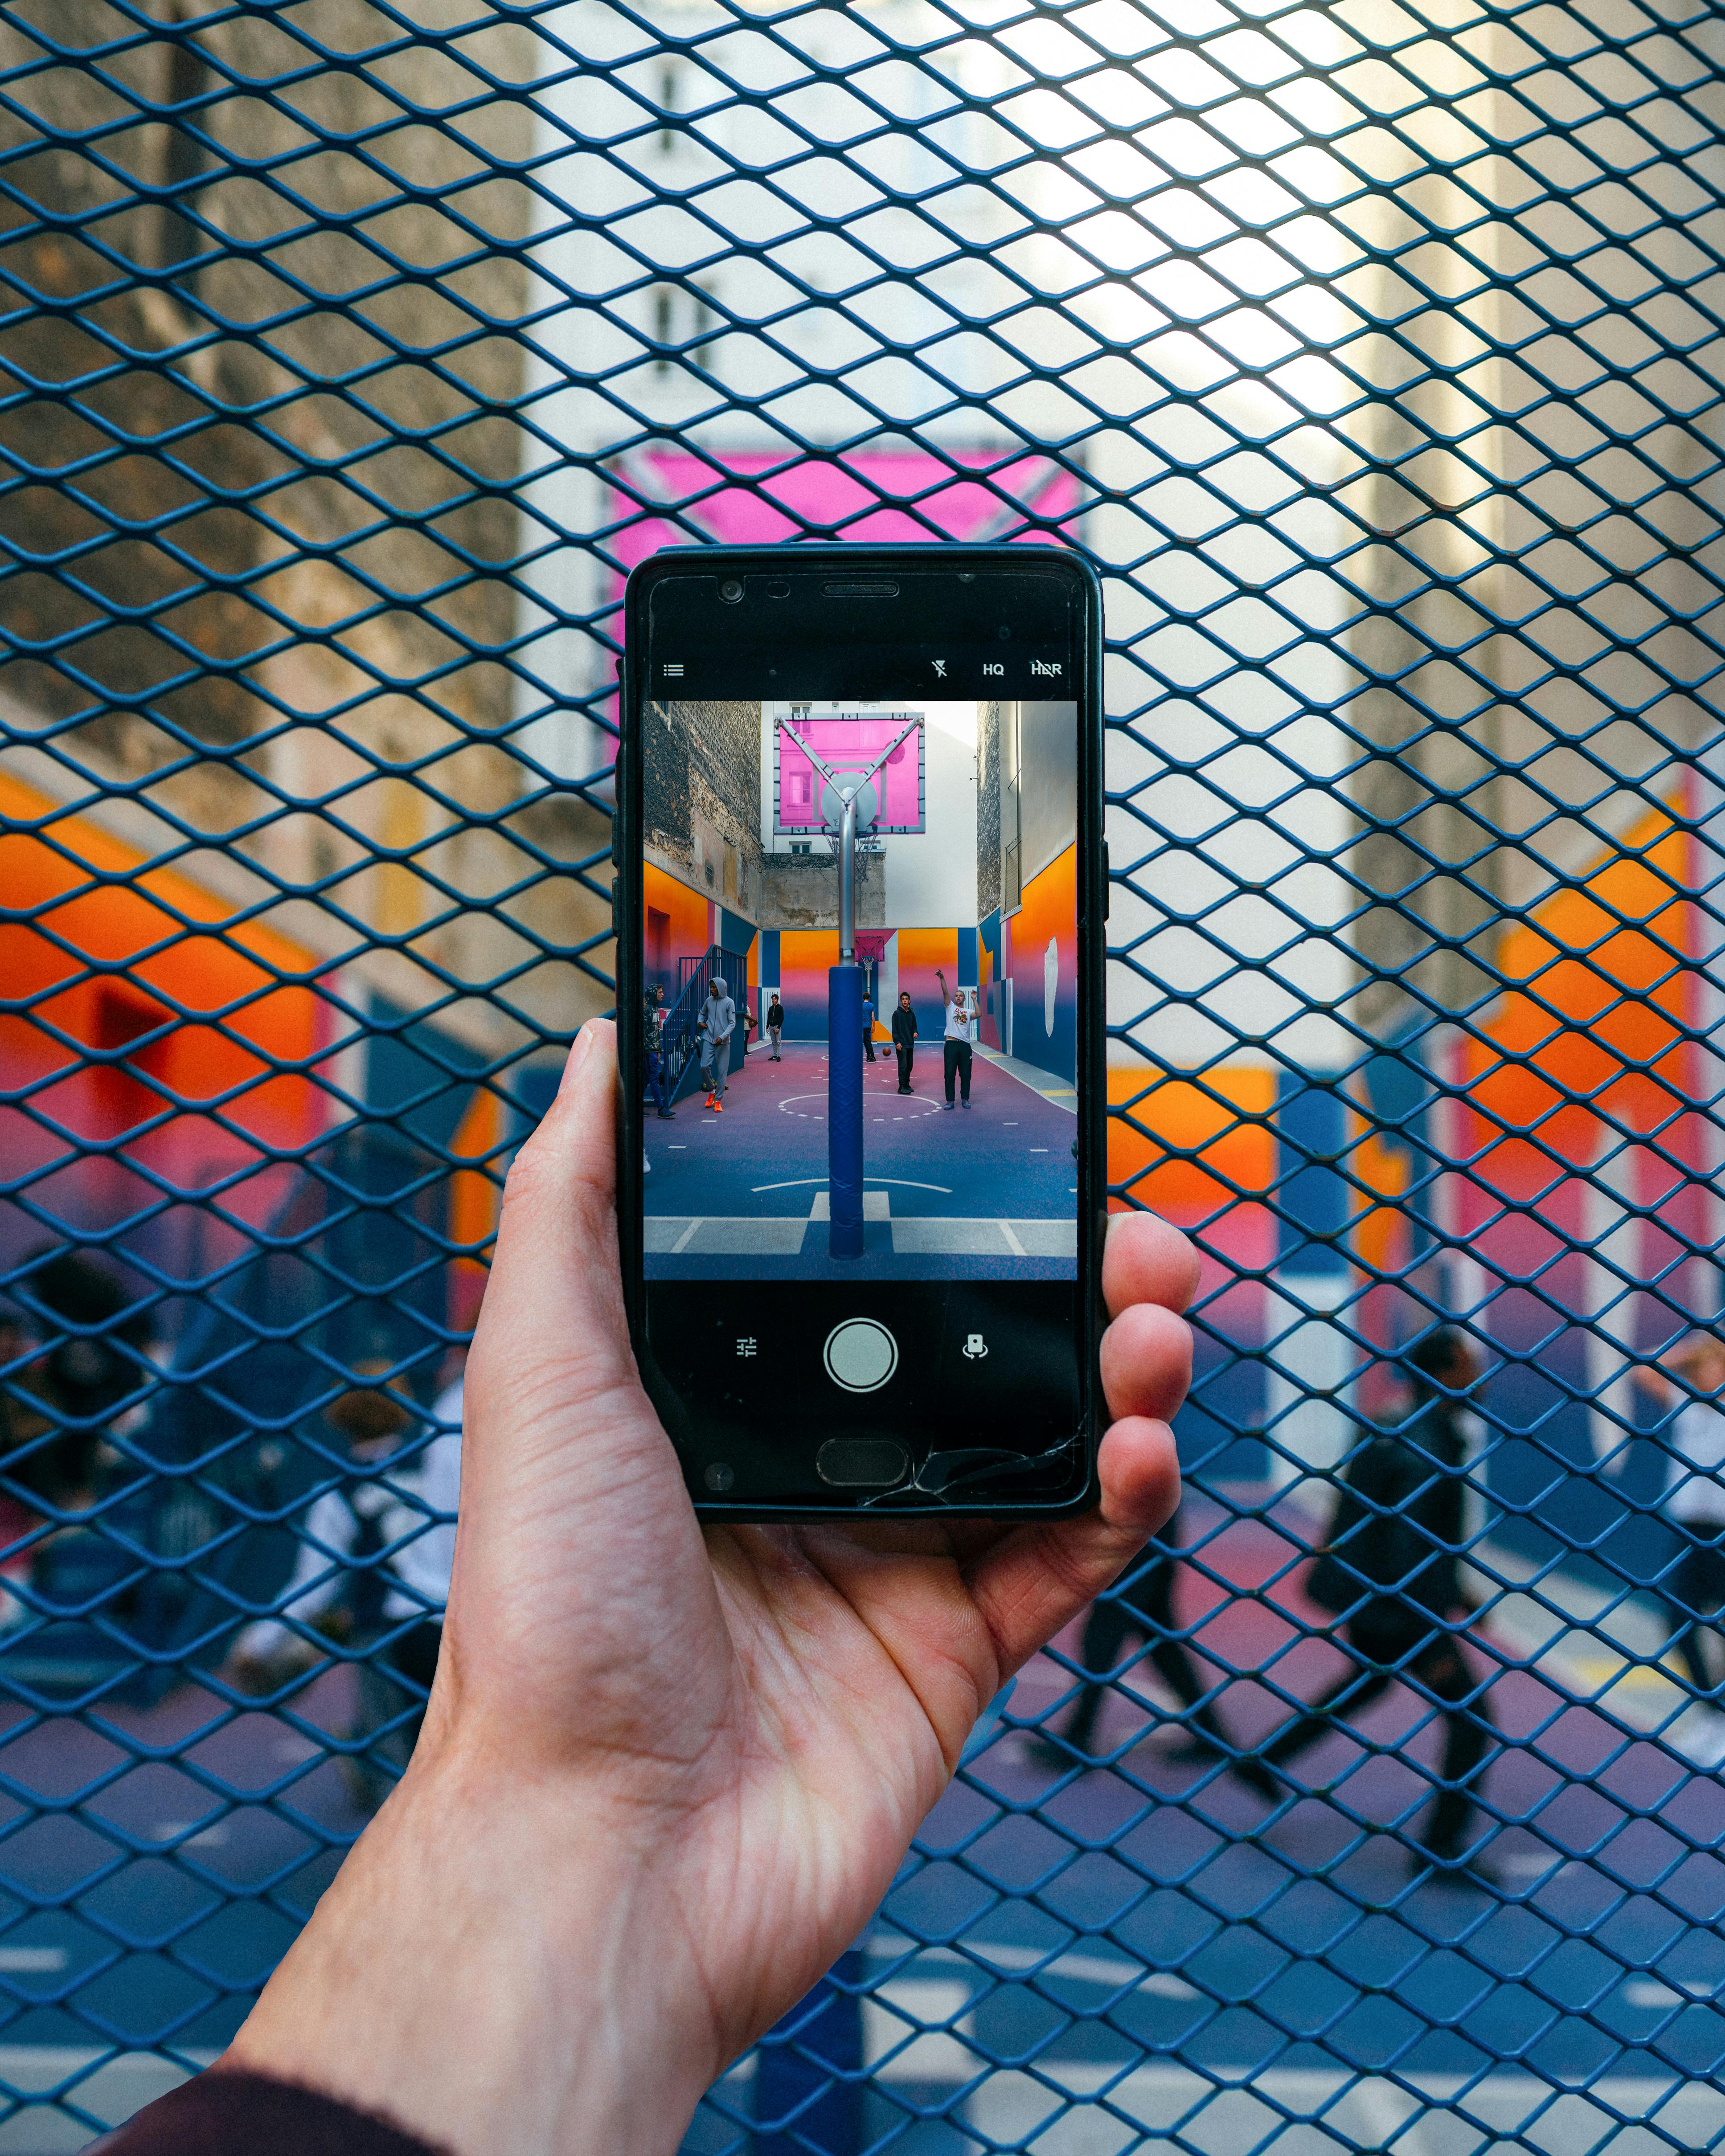 Free stock photo of #mobile #phone #pigalle #paris, #oneplus #grid #basketball #street